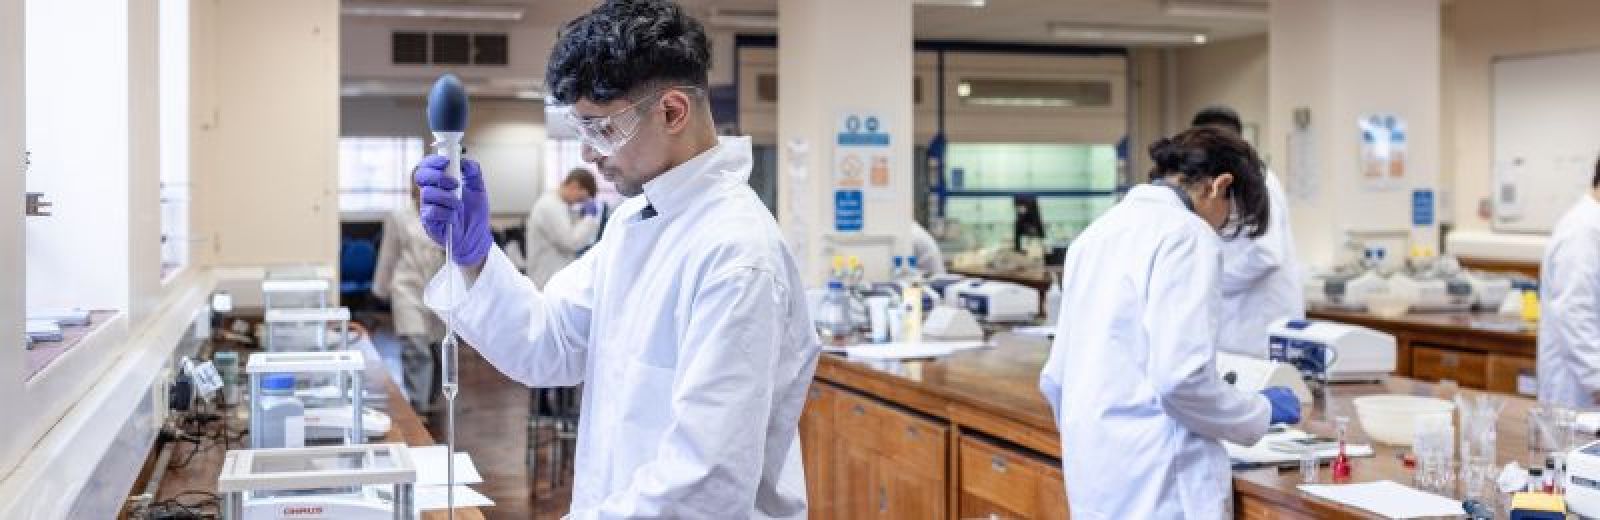 Students working in a chemistry lab at the University of Leeds. The students are dressed in white lab coats, and protective eye wear.